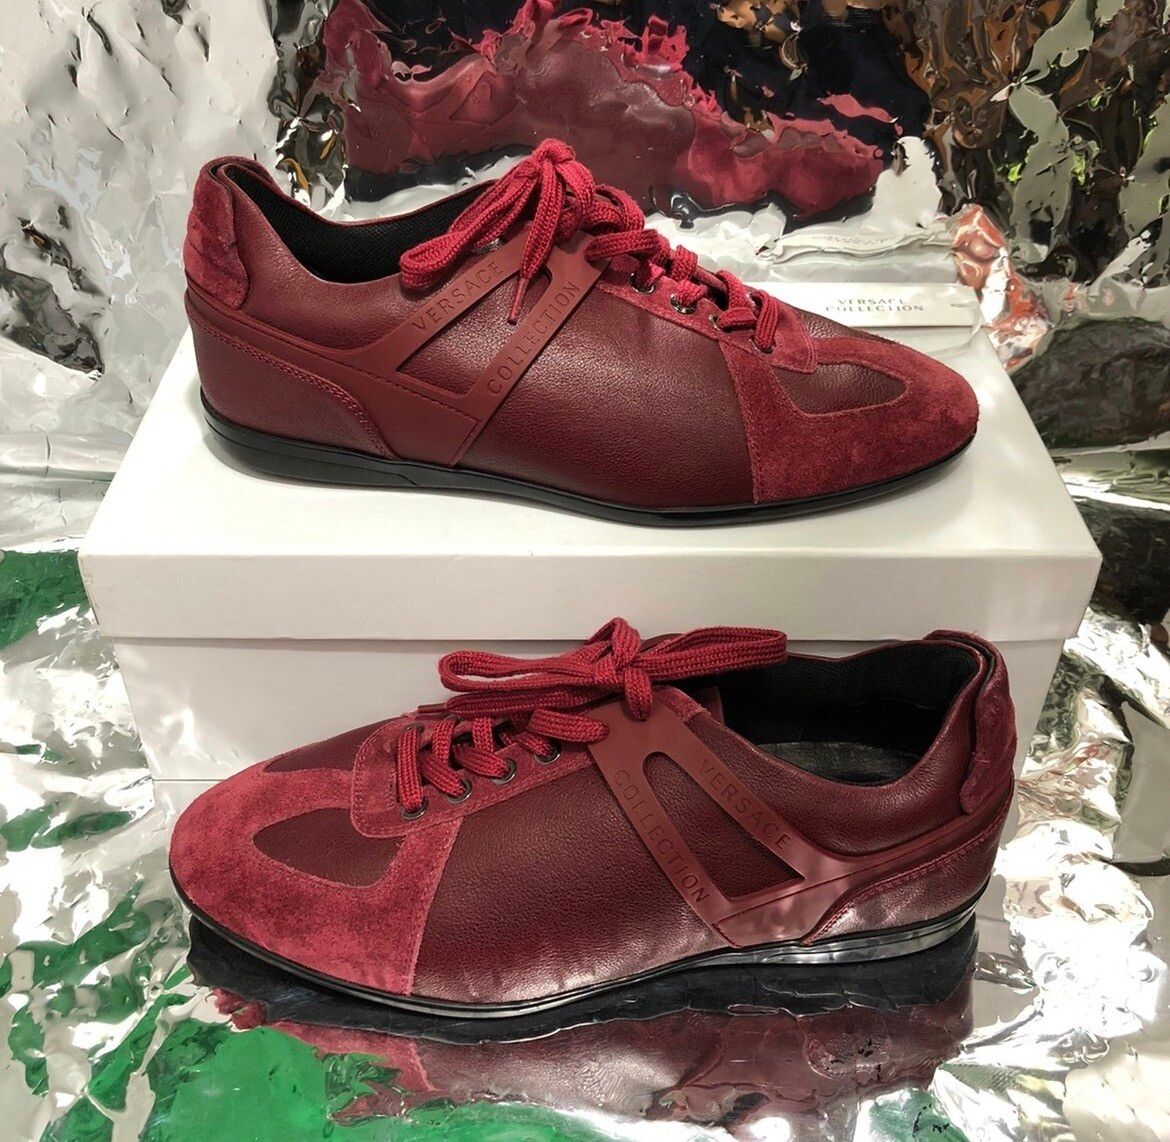 Versace Versace Burgundy Leather & Suede Shoes Size US 10 / EU 43 - 1 Preview